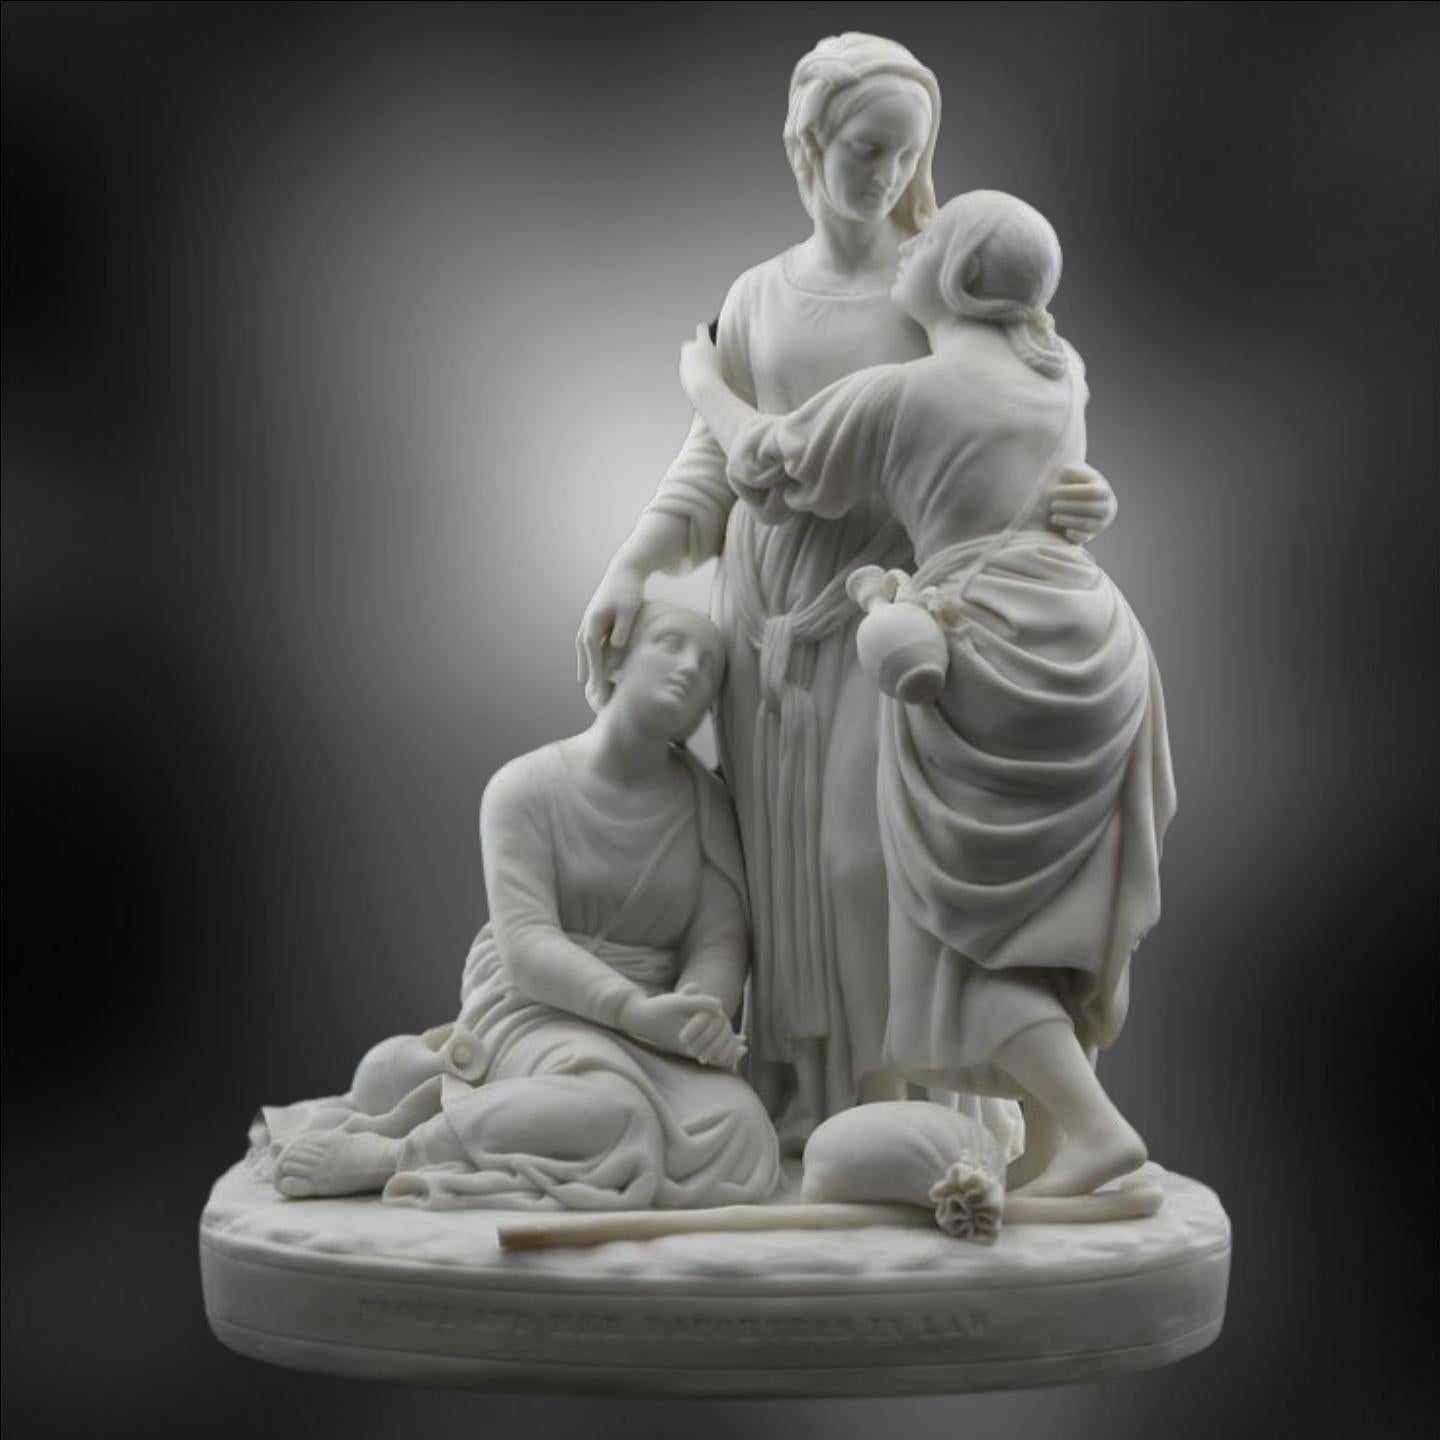 One of the great parian figural groups.

Parian is a form of pottery formulated to simulate marble, and it does it very well indeed. It was used extensively in the late 19th century to create authentic-looking sculptures, to help raise the taste and